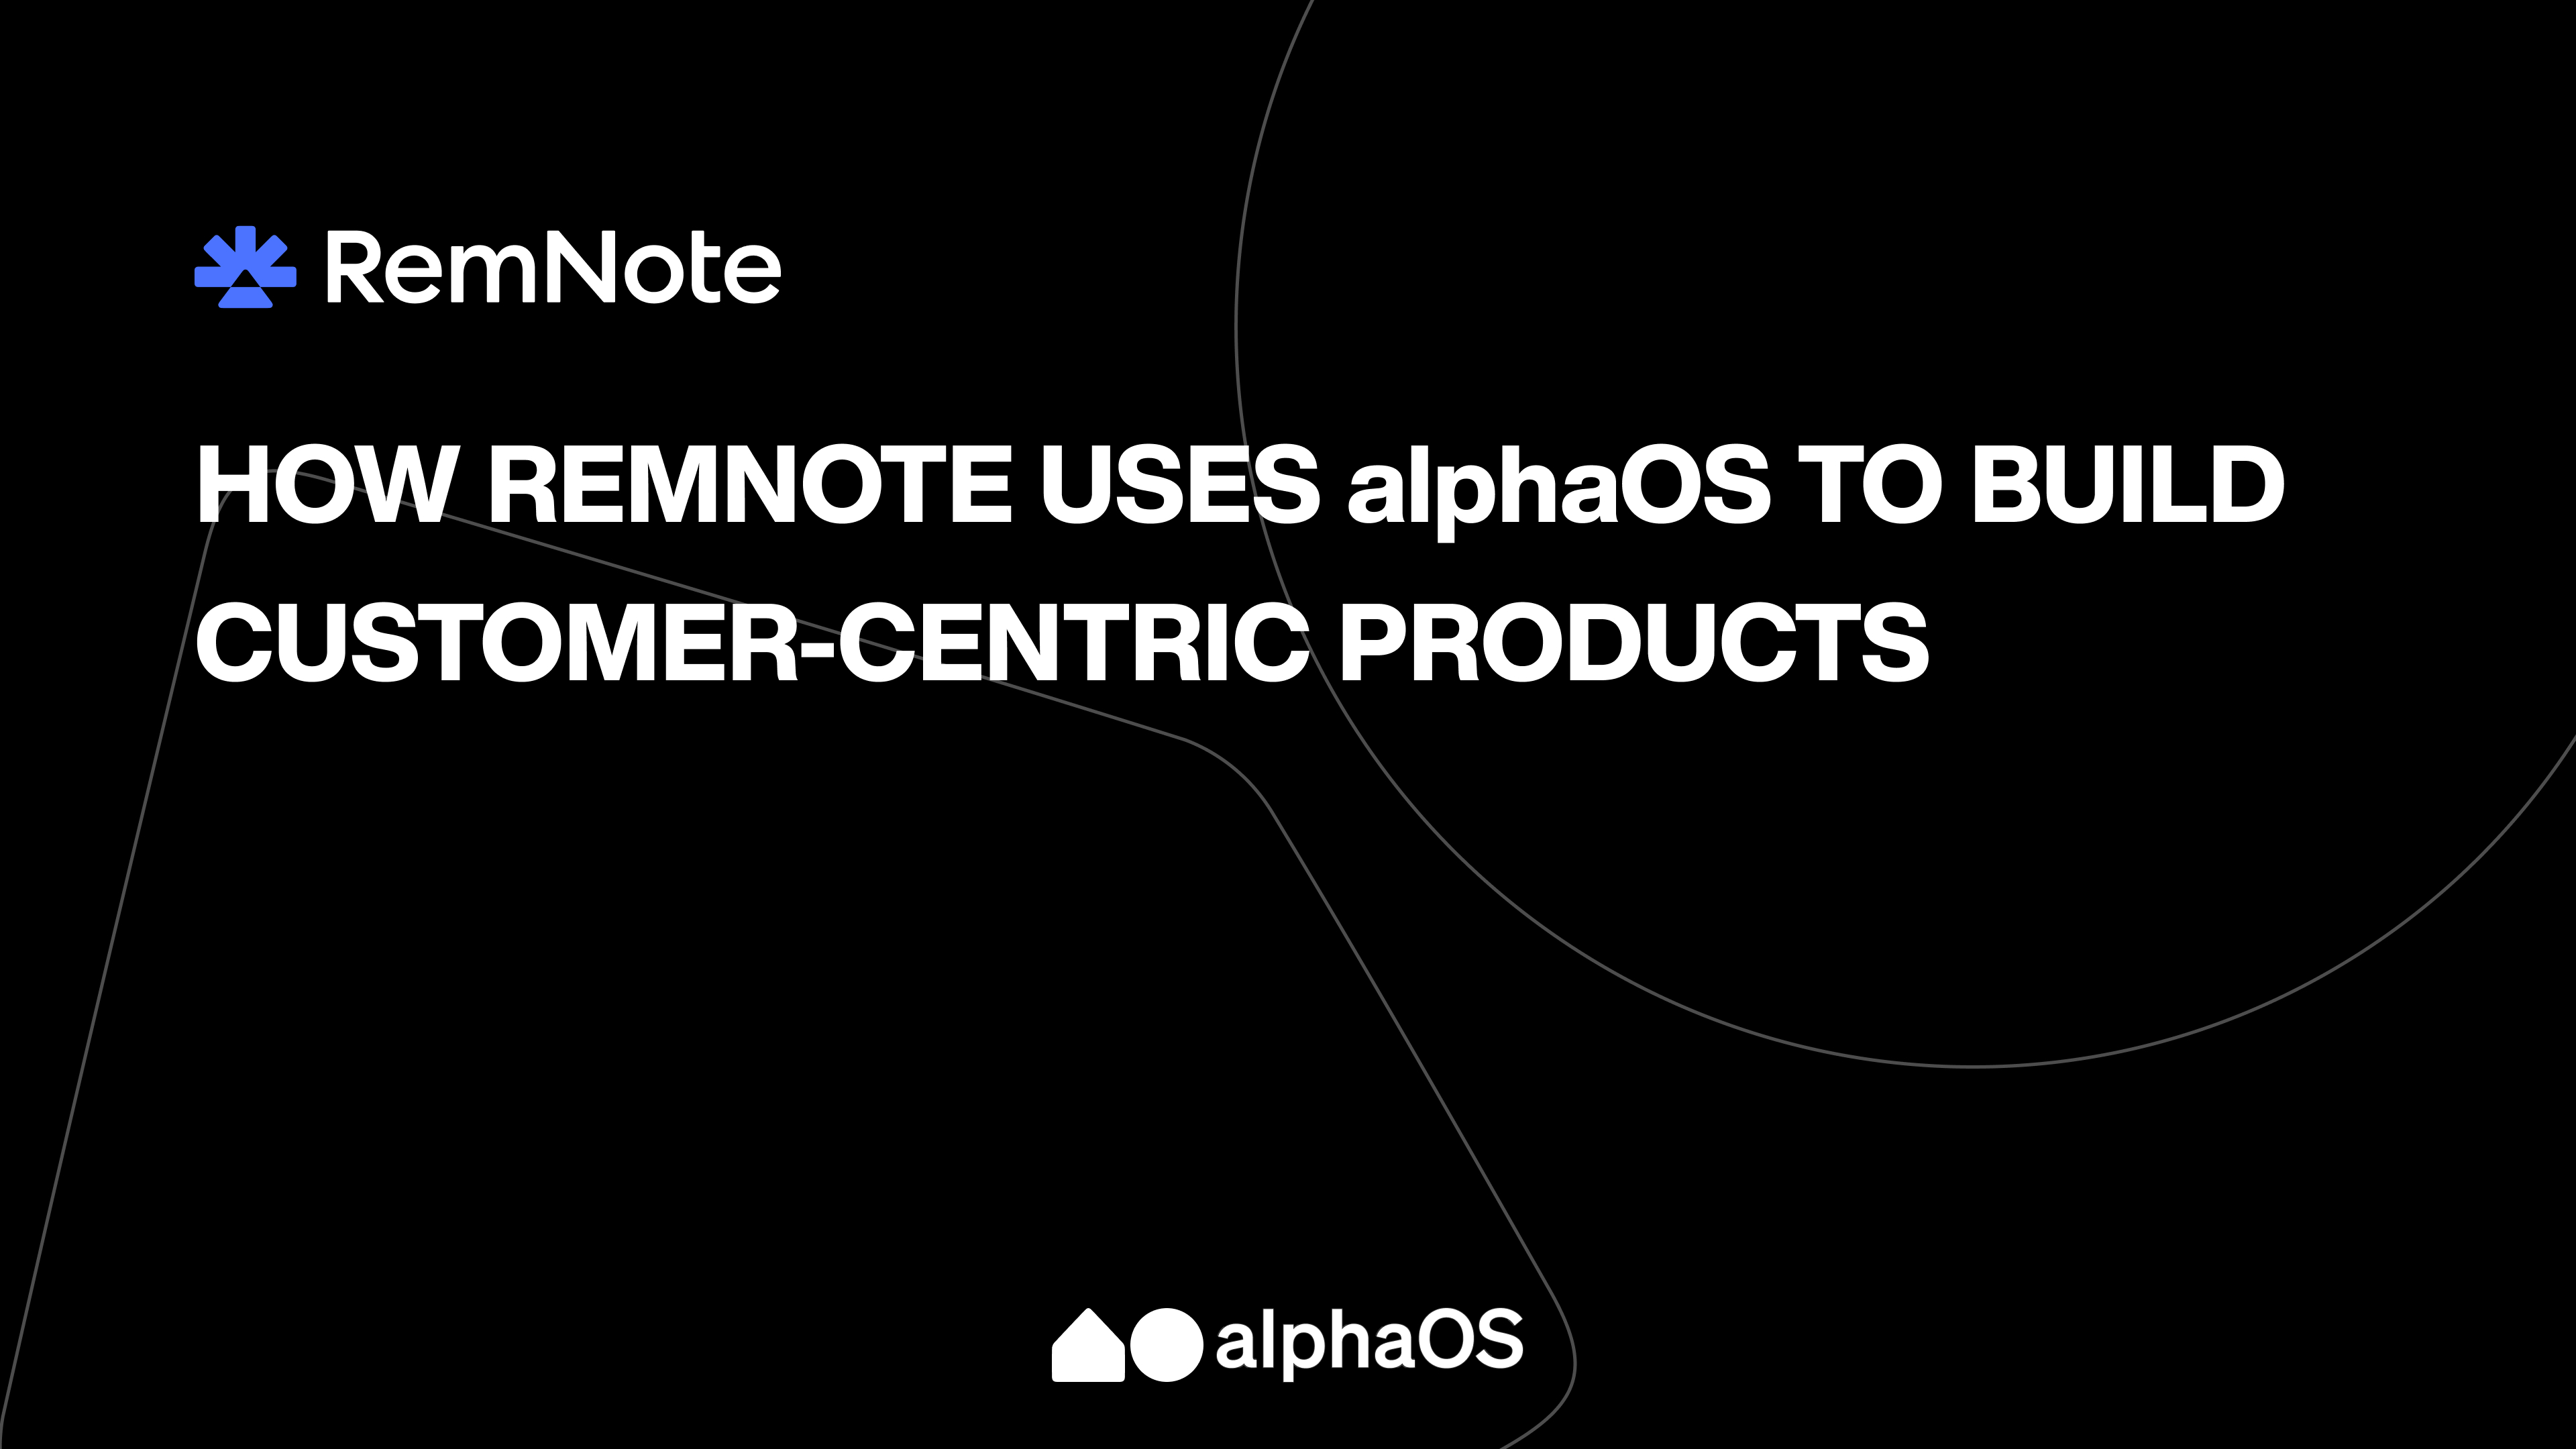 How Remnote uses alphaOS to build customer-centric products